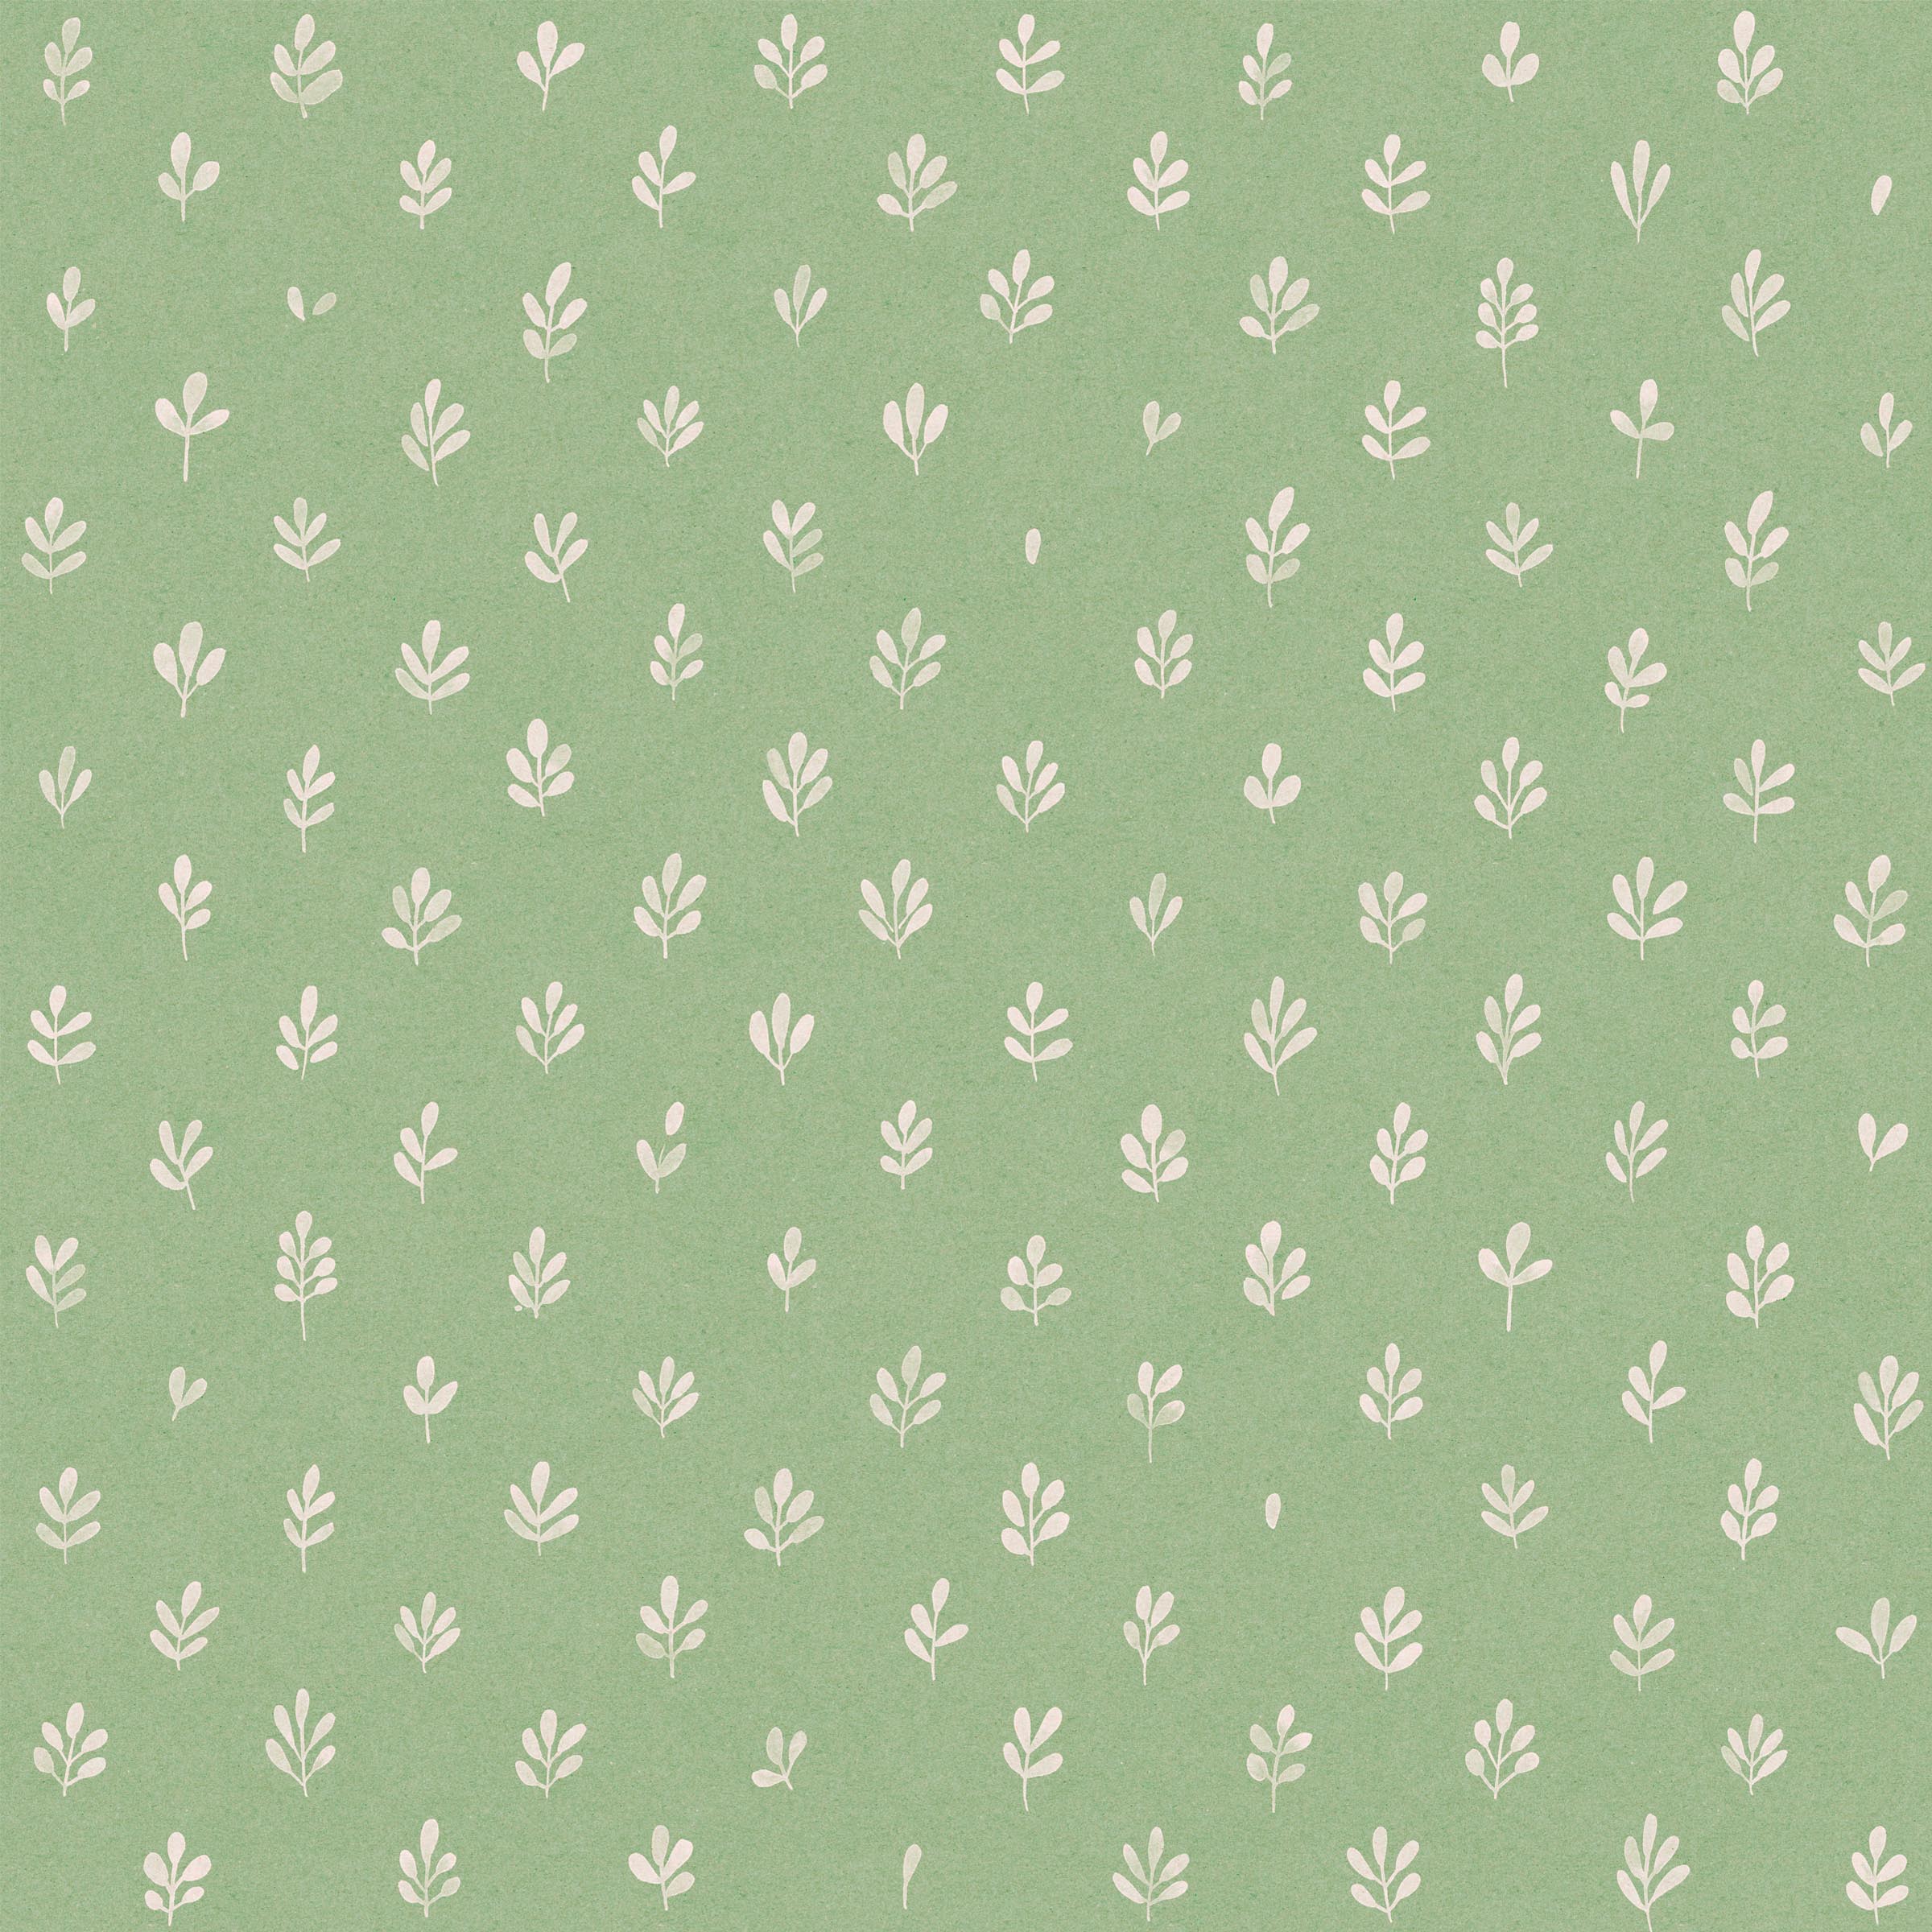 Detail of fabric in a repeating leaf print in cream on a green field.